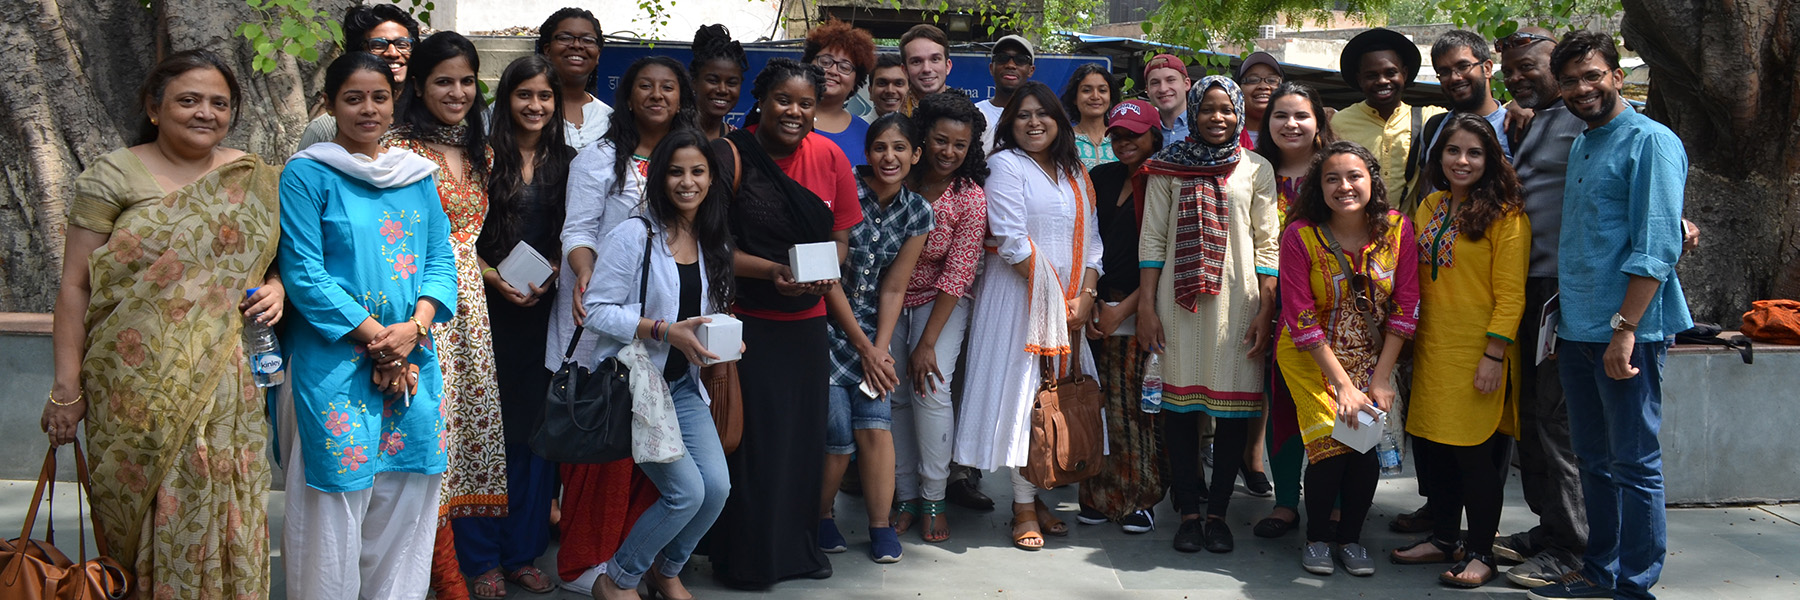 A group of study abroad participants pose together.